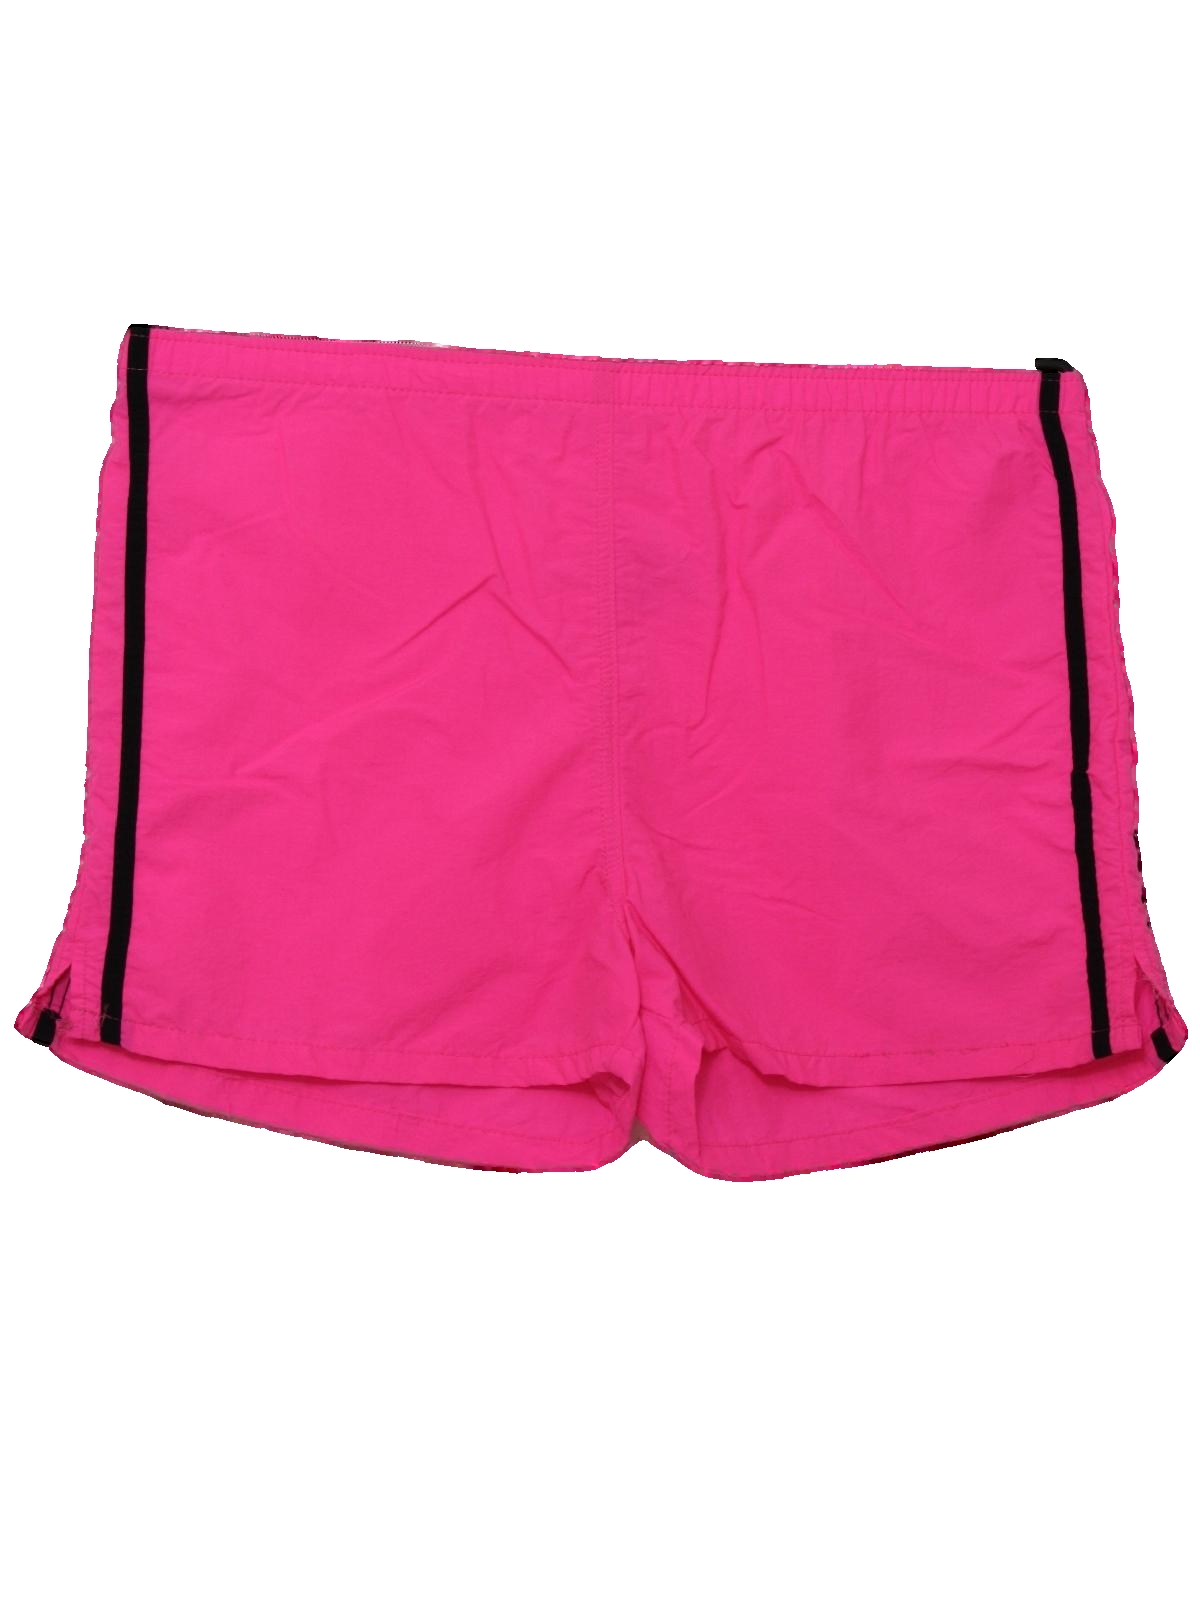 Athletic Works 90's Vintage Shorts: 90s -Athletic Works- Unisex neon ...